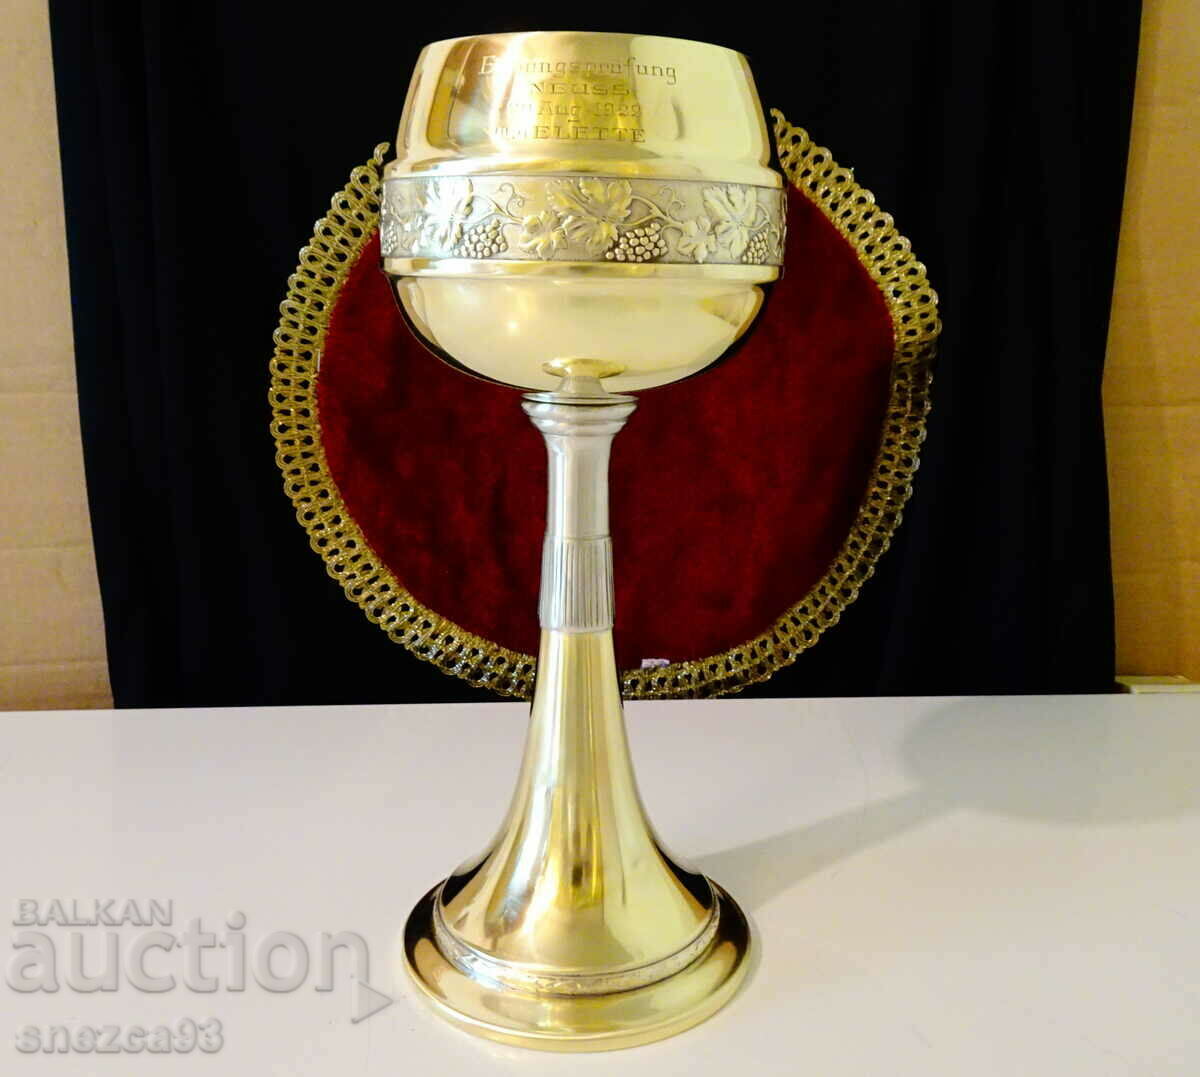 A magnificent brass goblet from 1922.